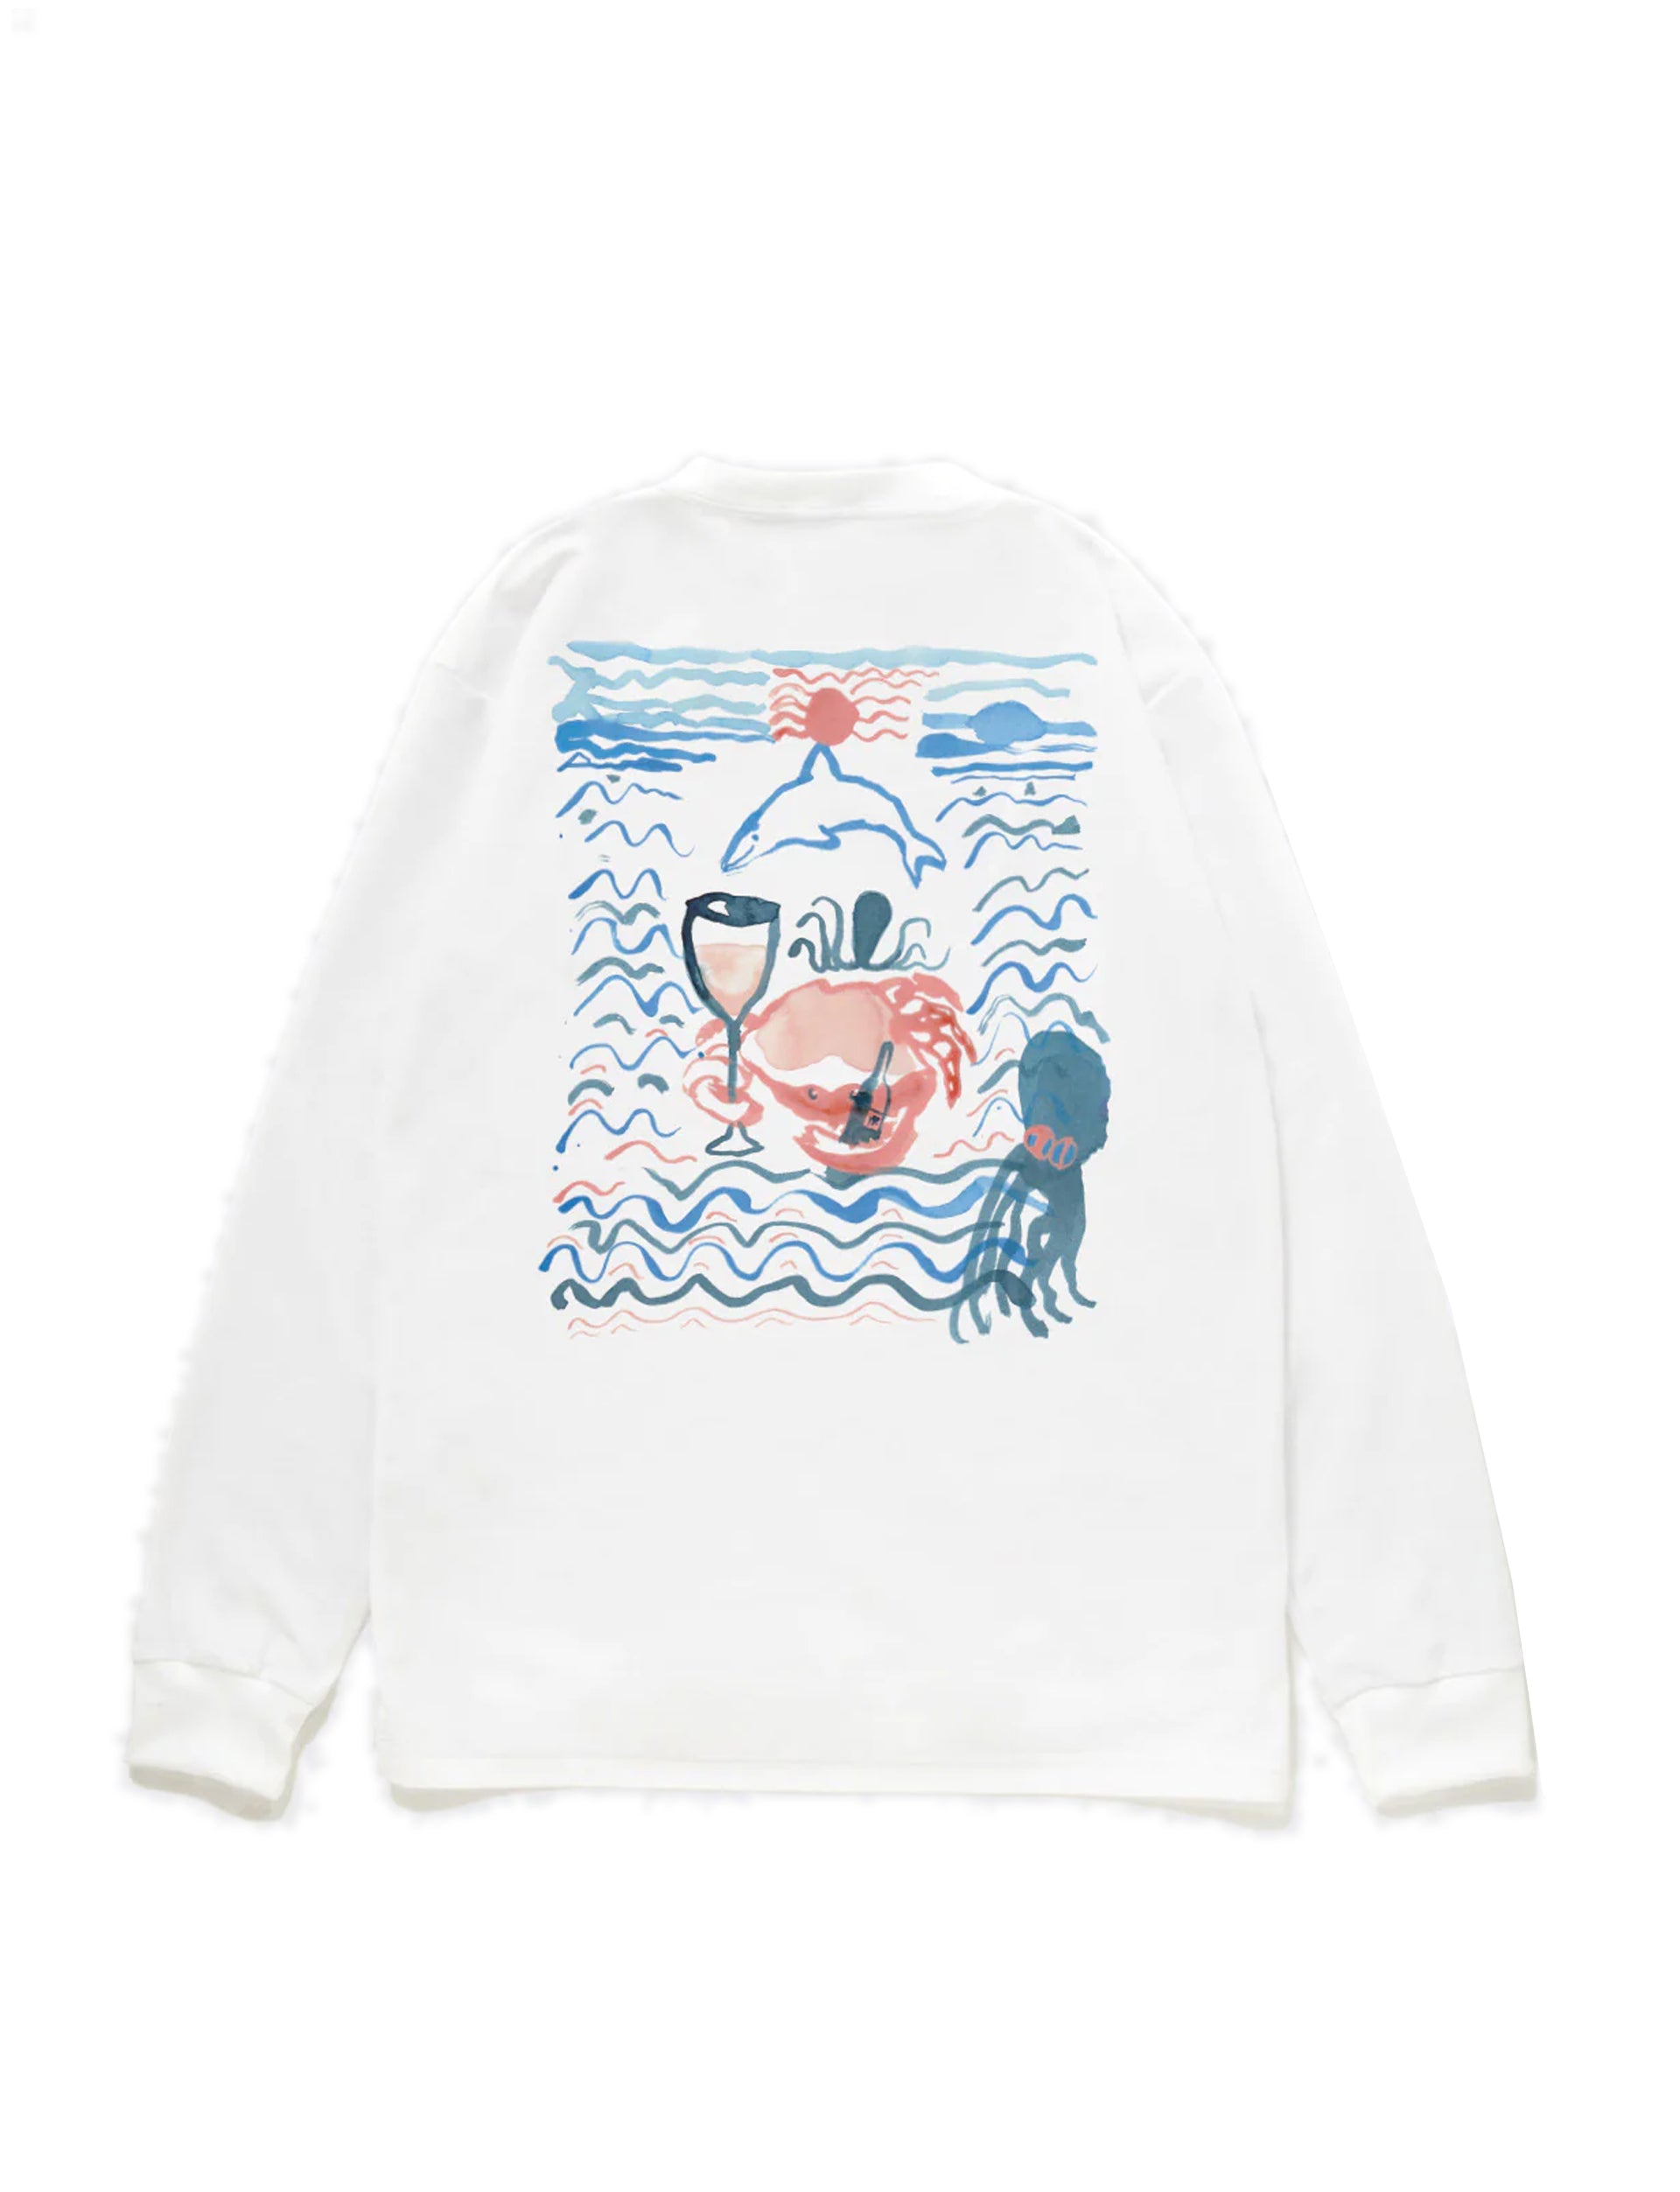 RECEPTION CLOTHING L/S TEE CAPTAIN PIPINOS